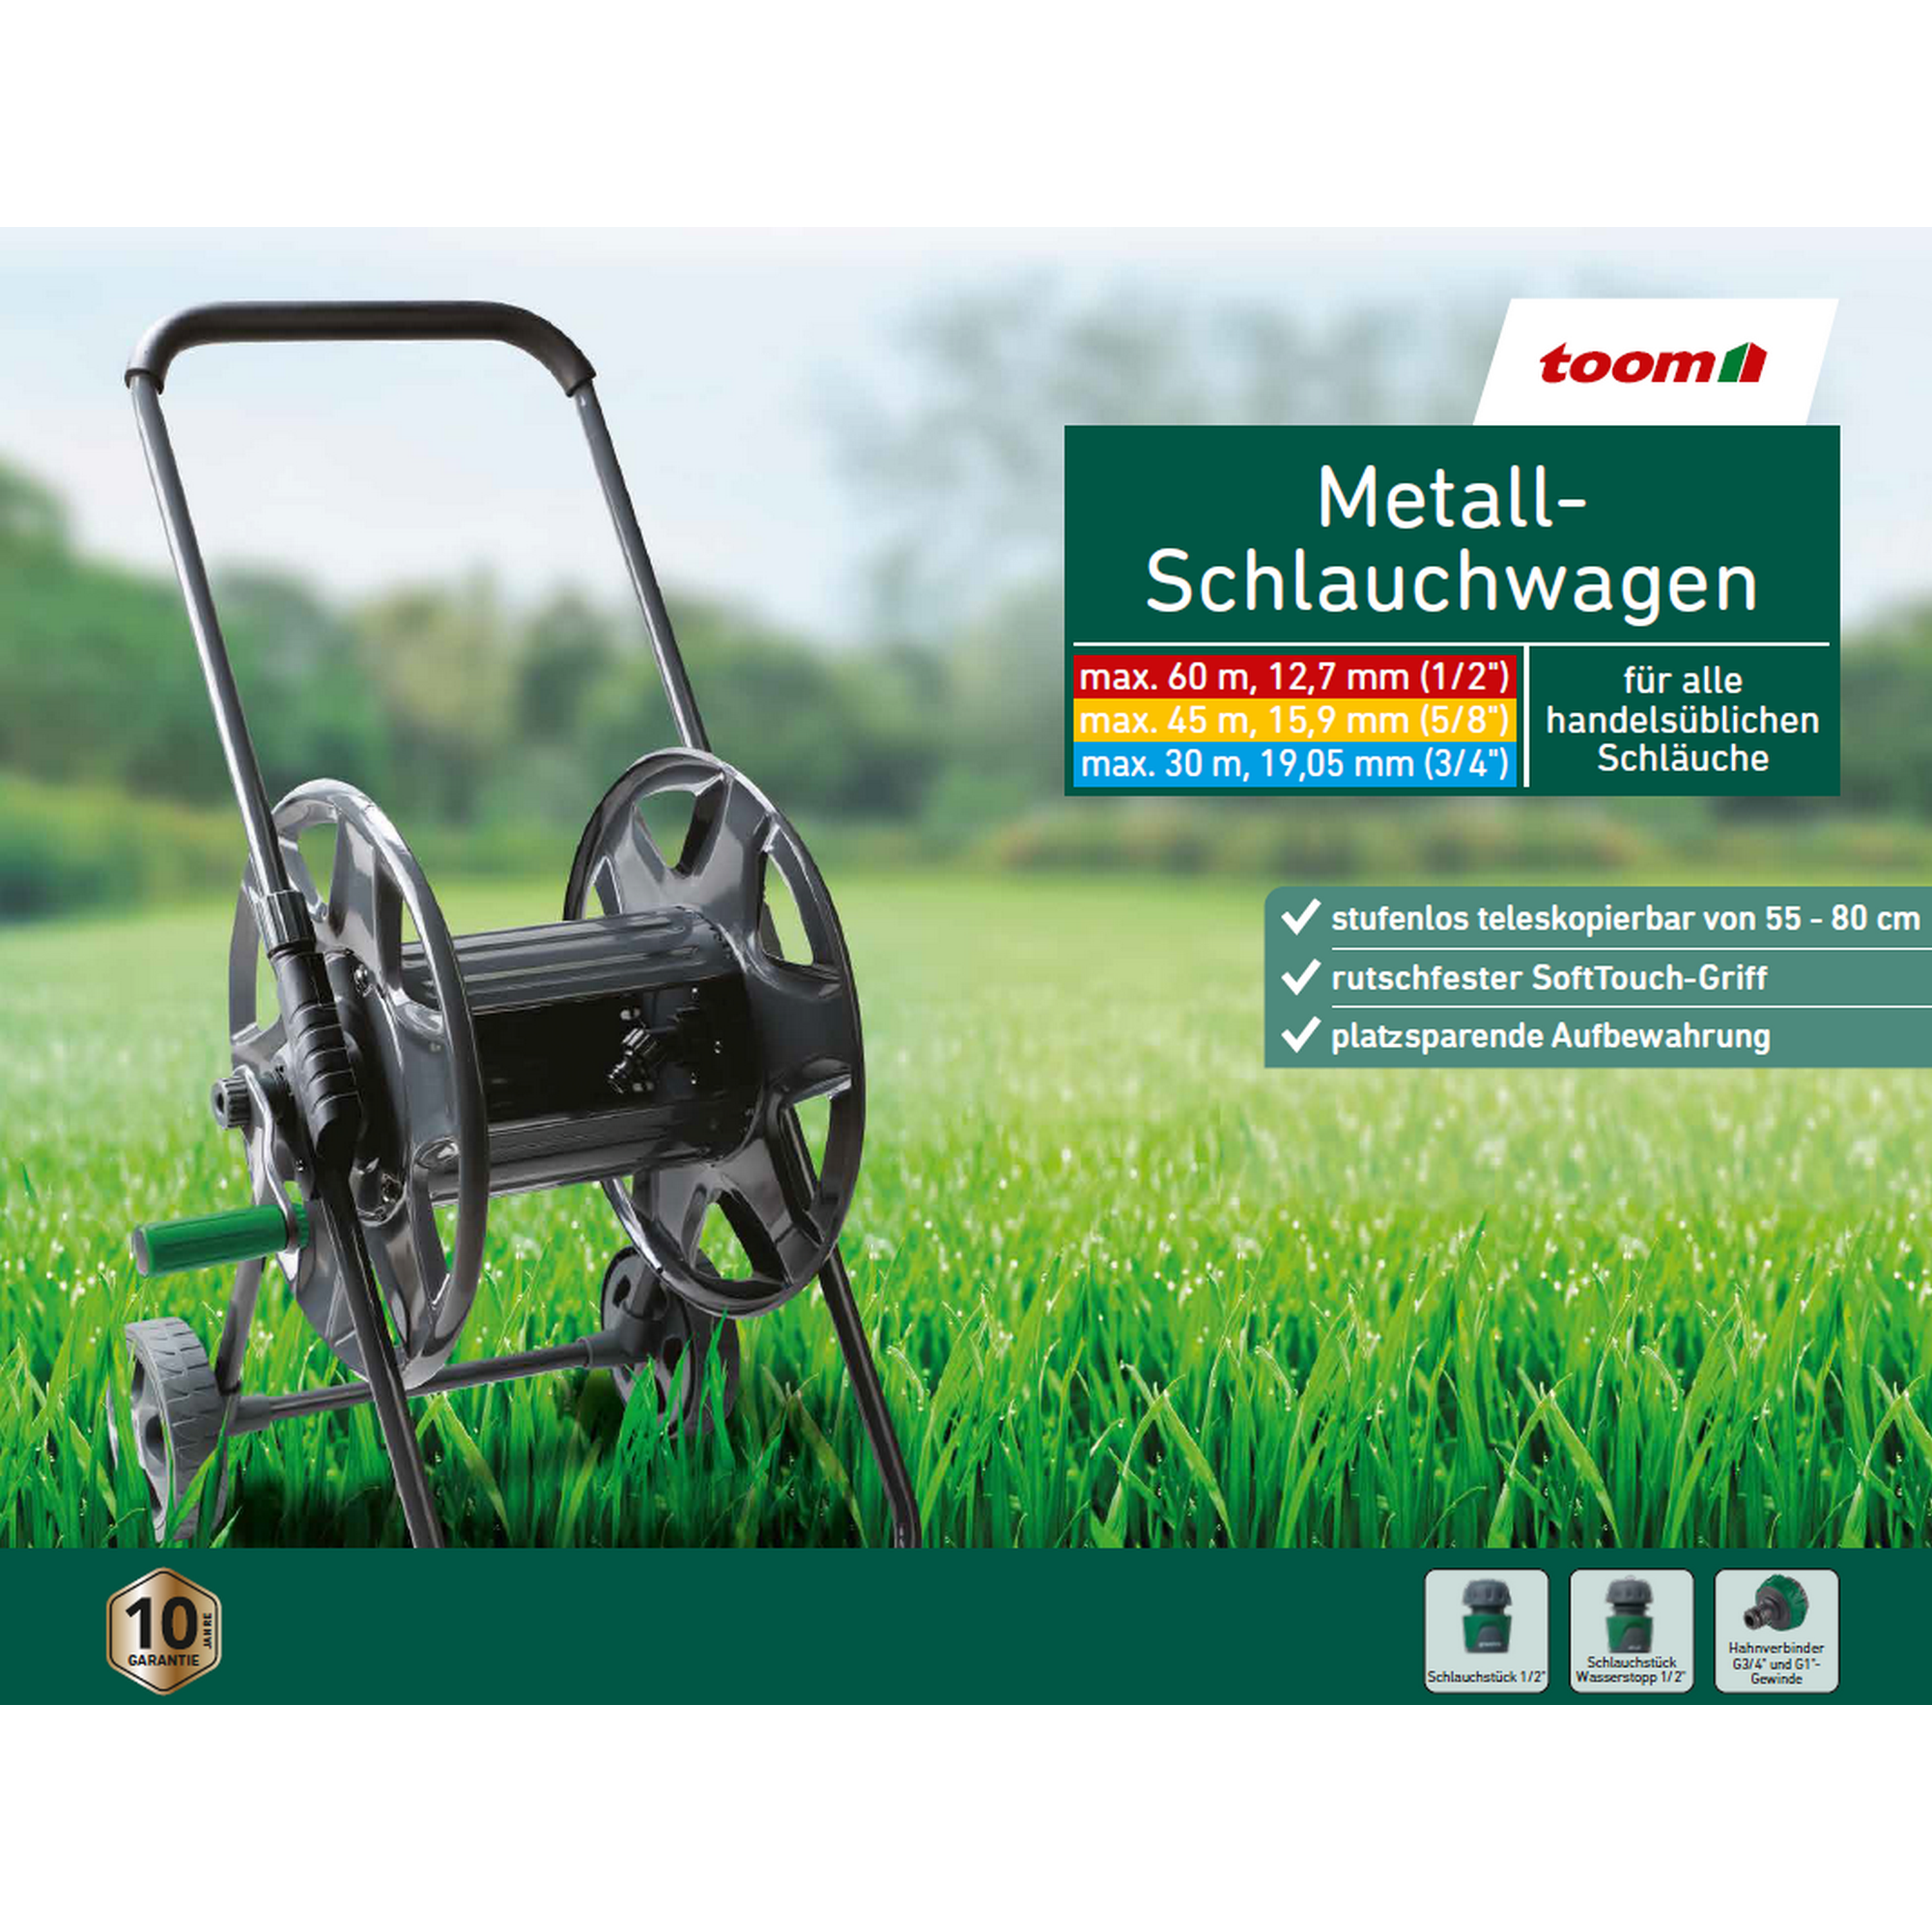 Metall-Schlauchwagen max. 60 m + product picture